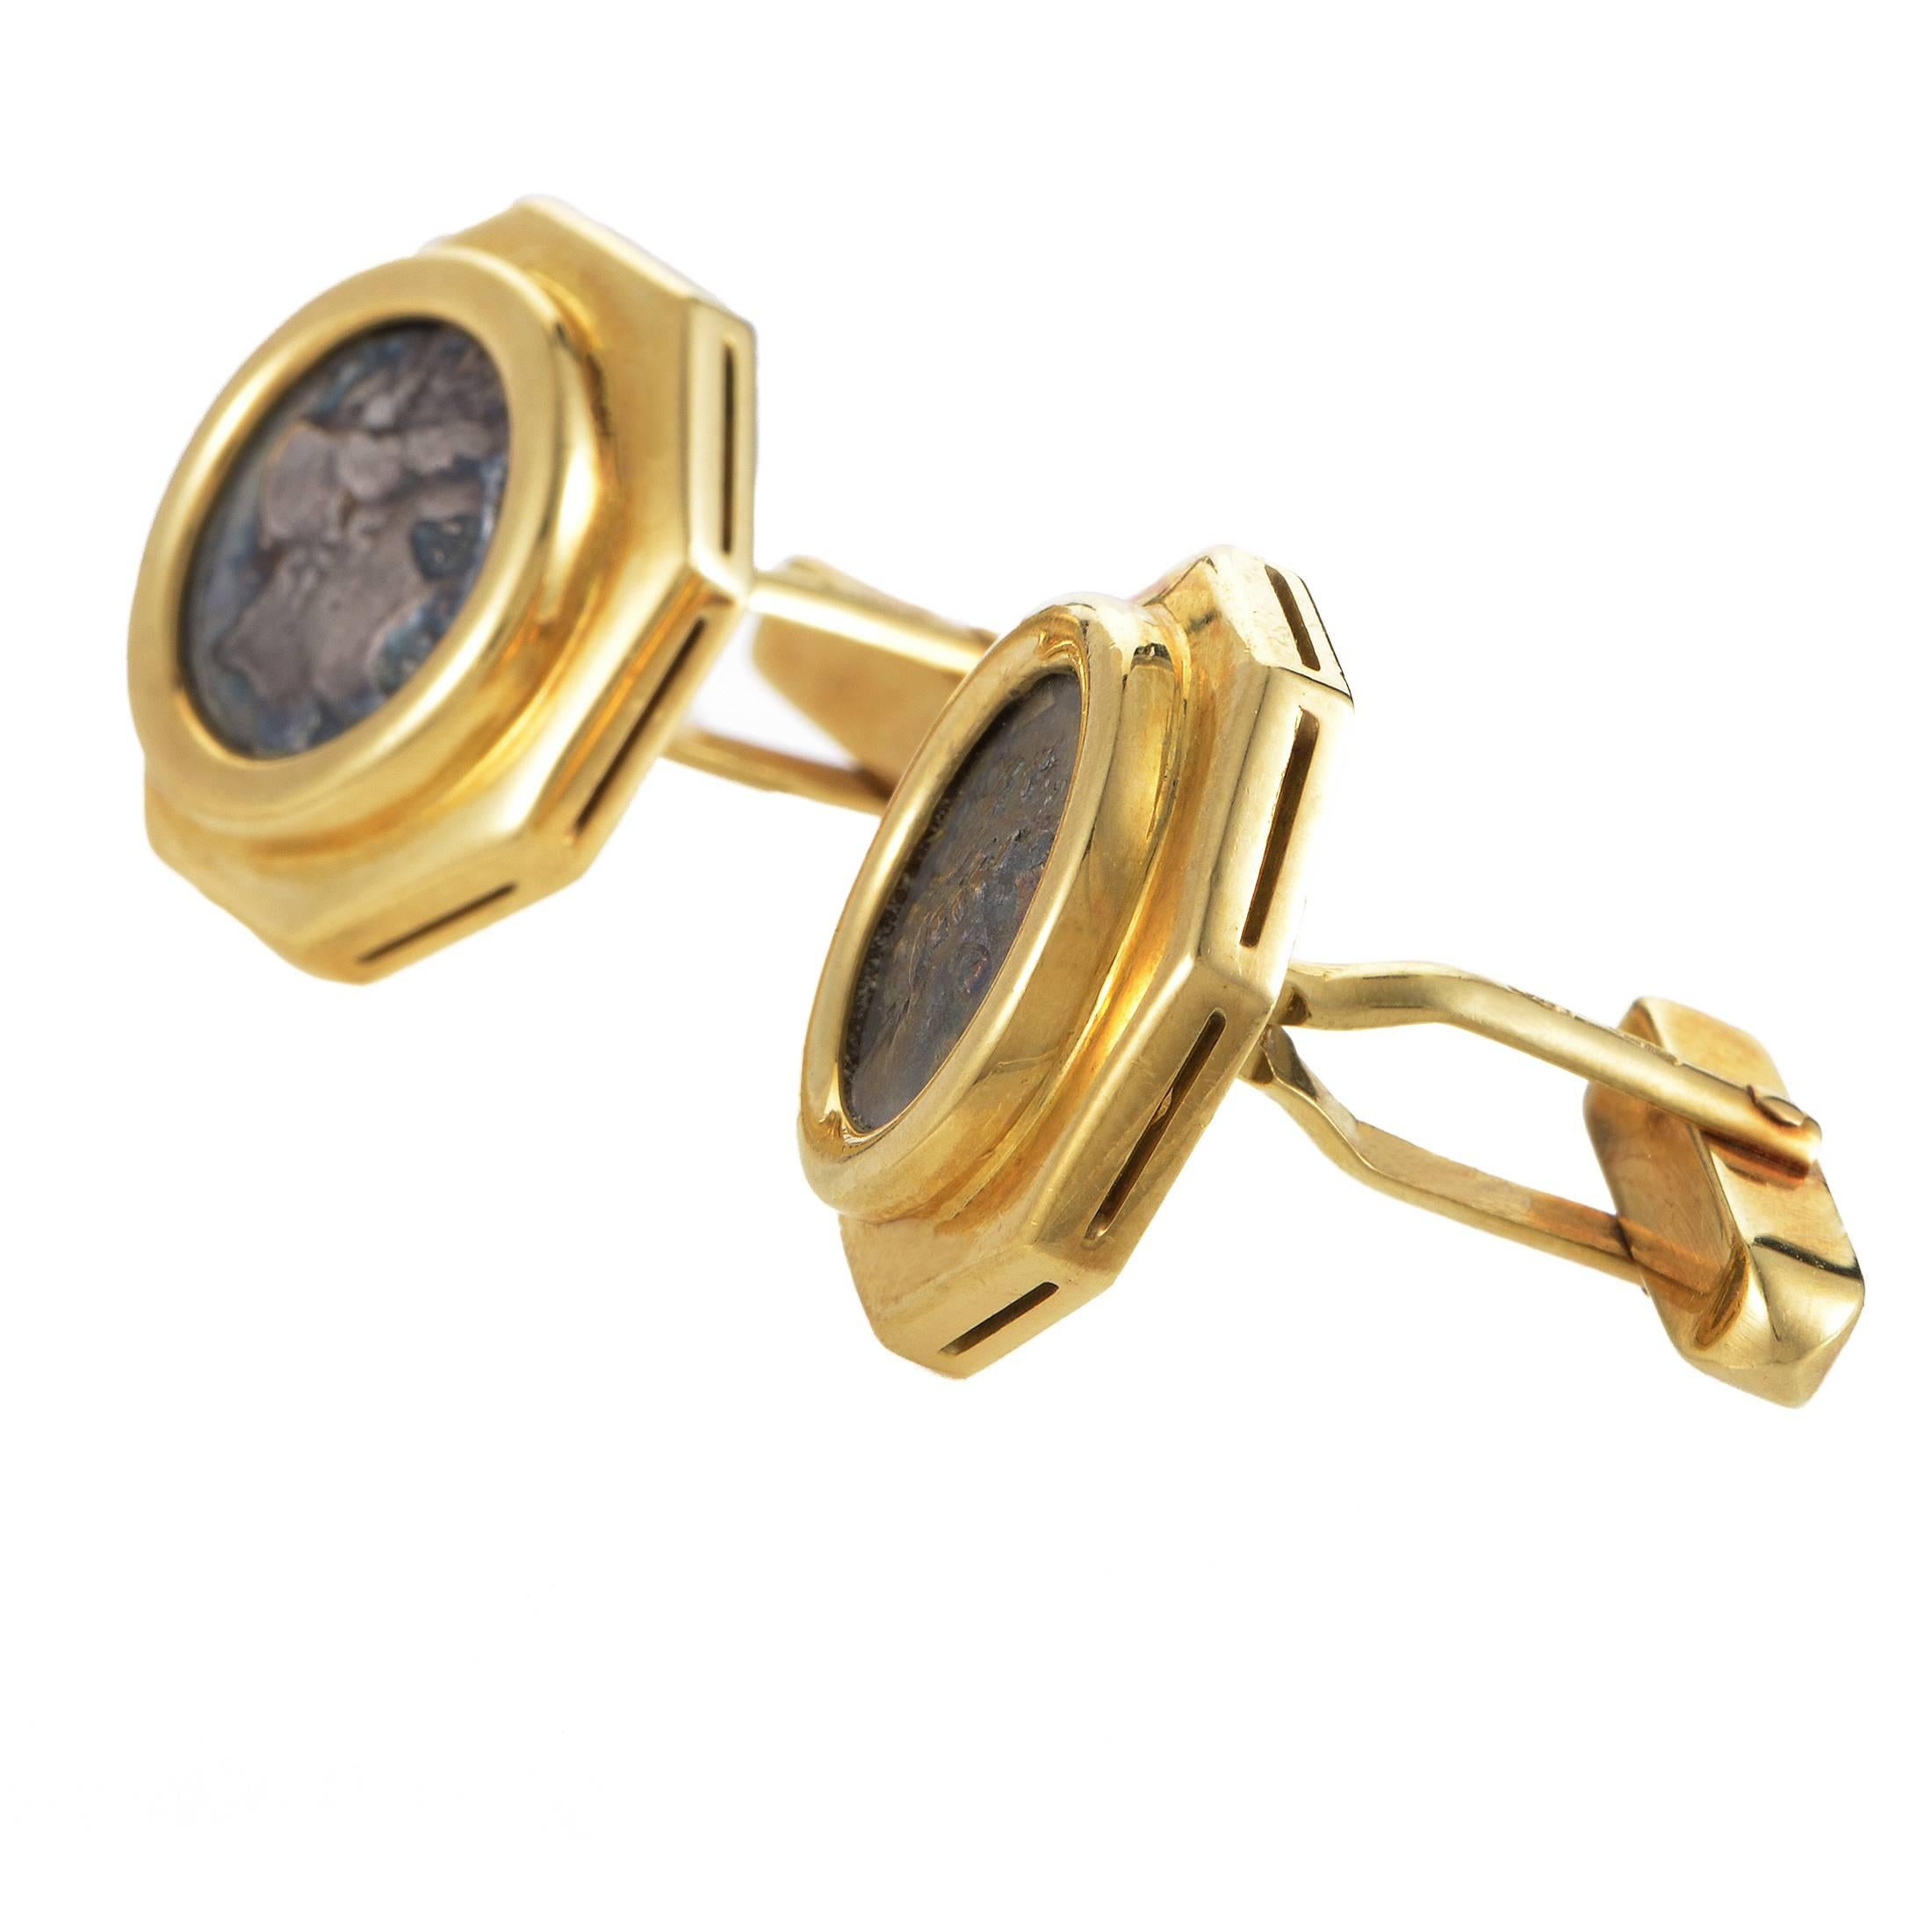 For a touch of history and a sight of elegance on your wrist, these splendid cufflinks from Bulgari are made of exquisitely crafted 18K yellow gold and boast ancient coins for an intriguing effect.
Included Items: Manufacturer's Box